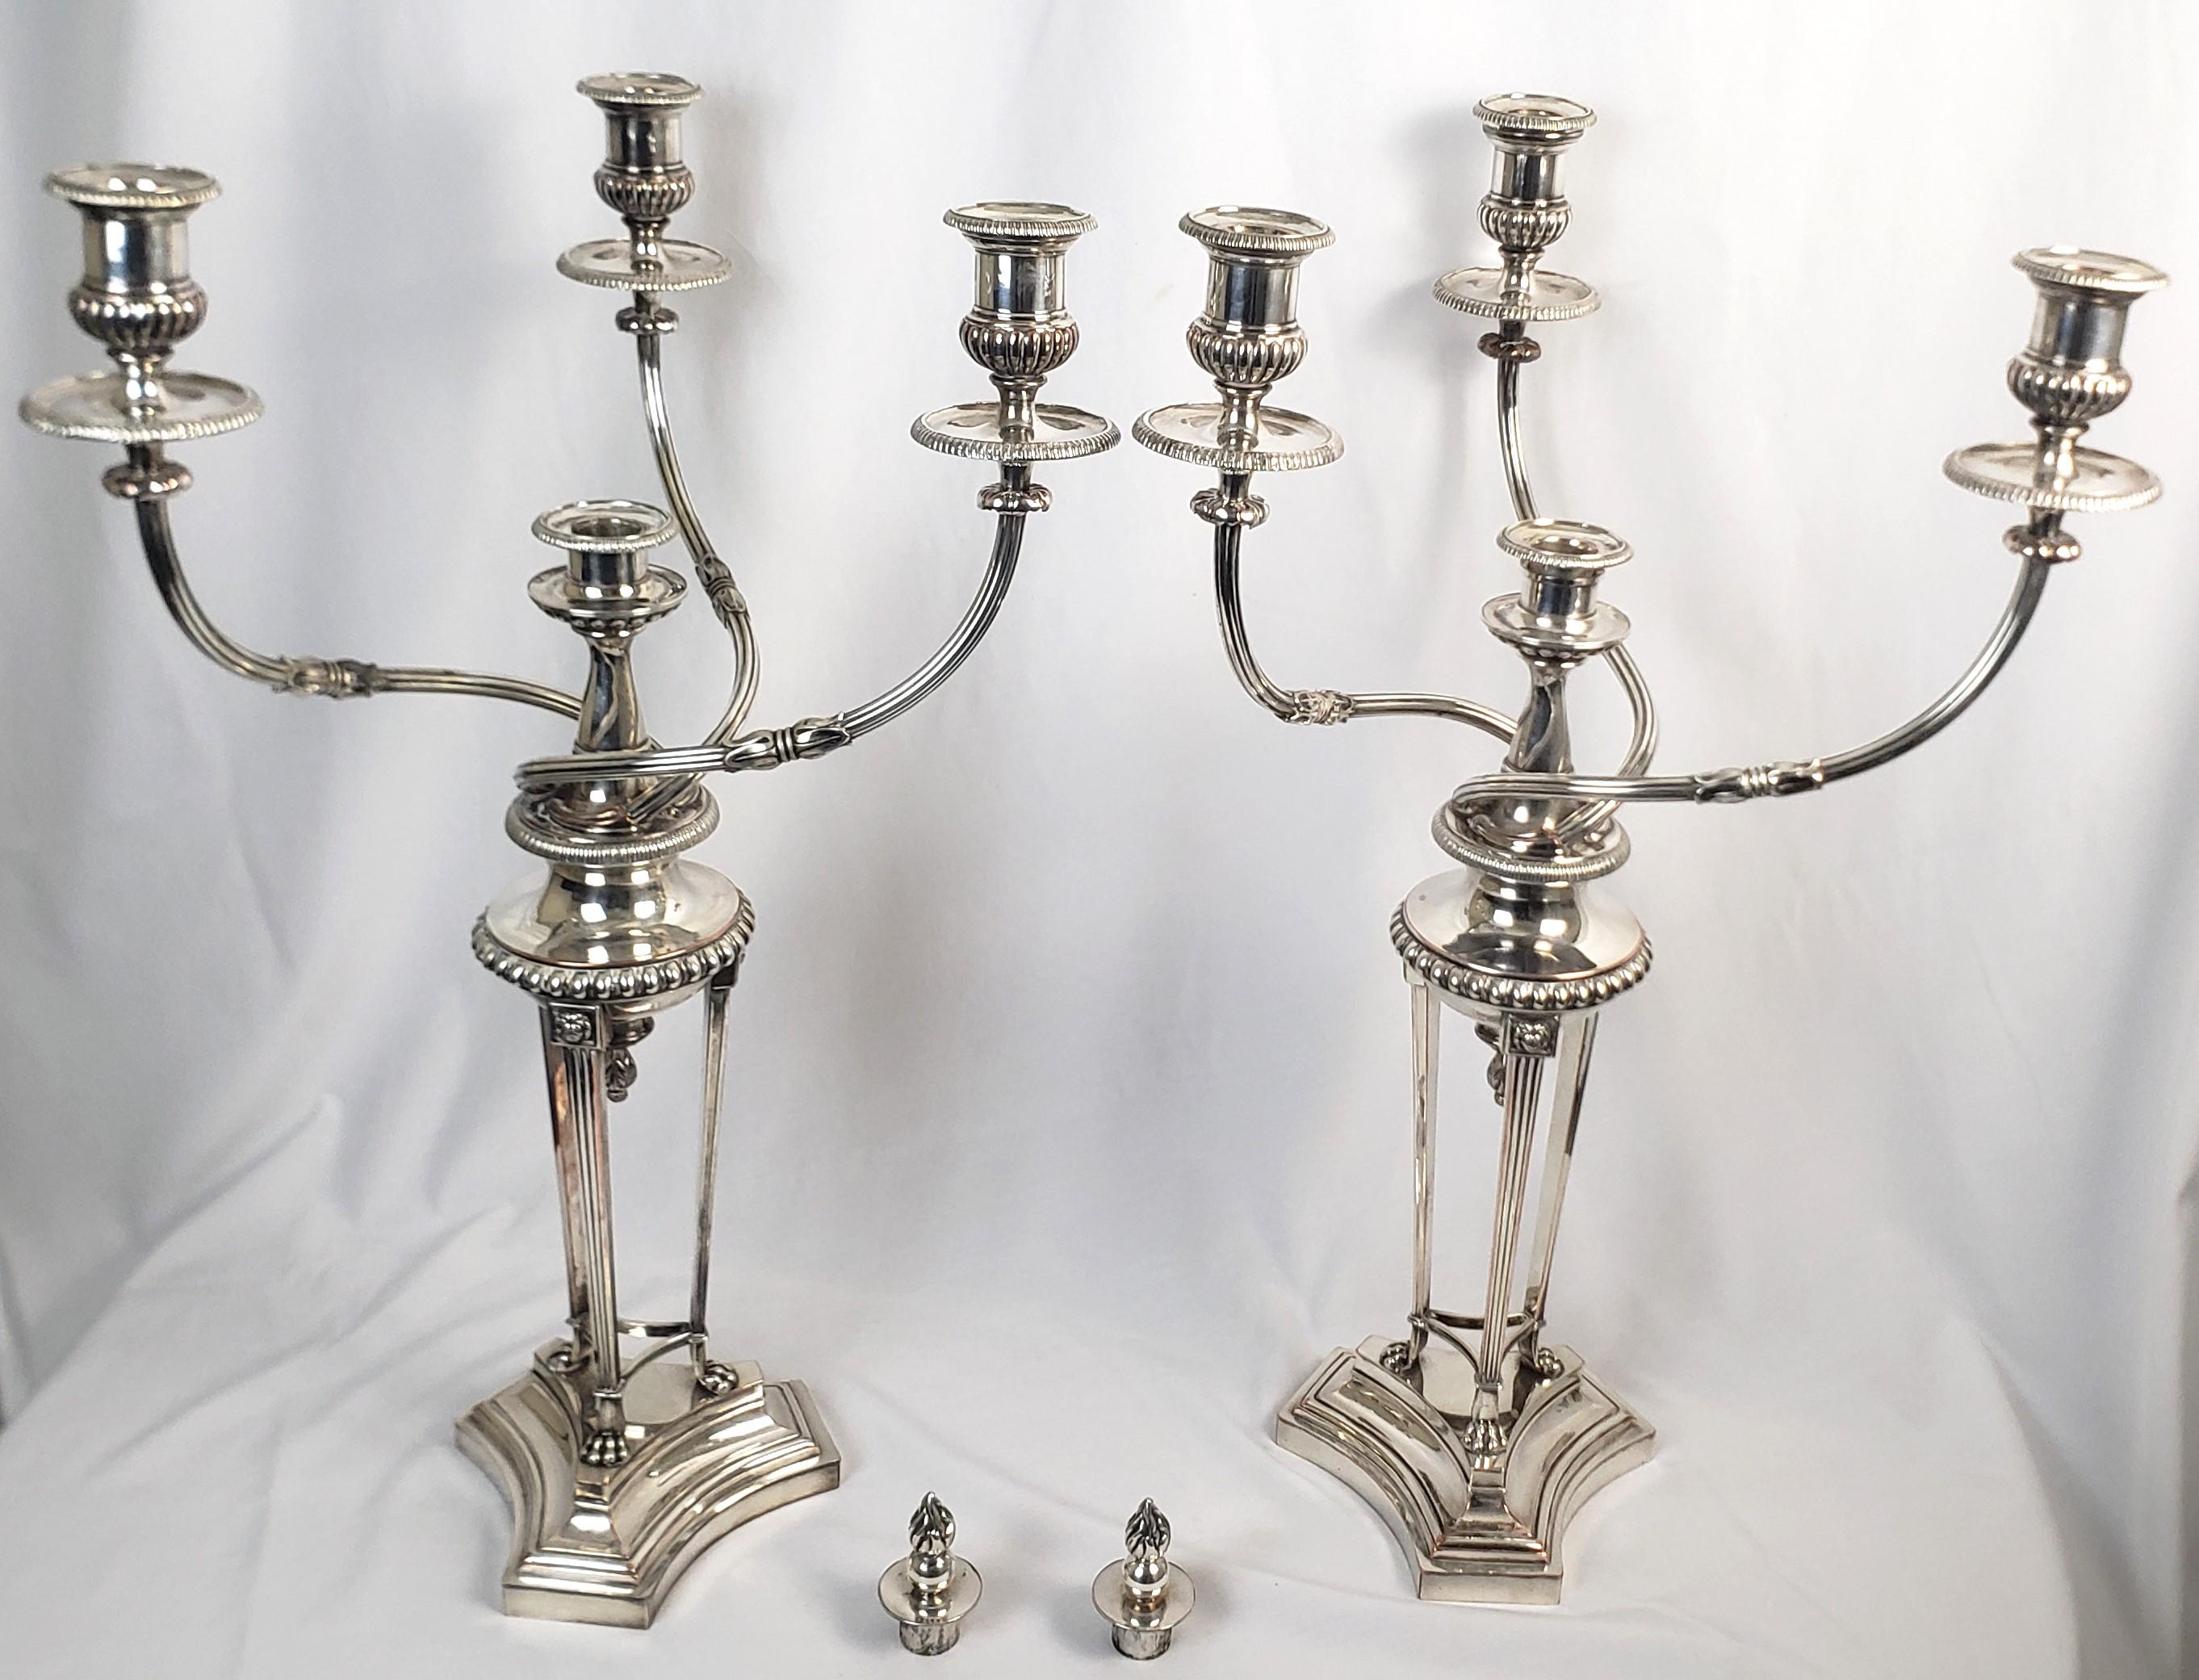 Pair of Huge Antique Matthew Boulton Regency Three Arm Silver Plated Candelabras For Sale 3